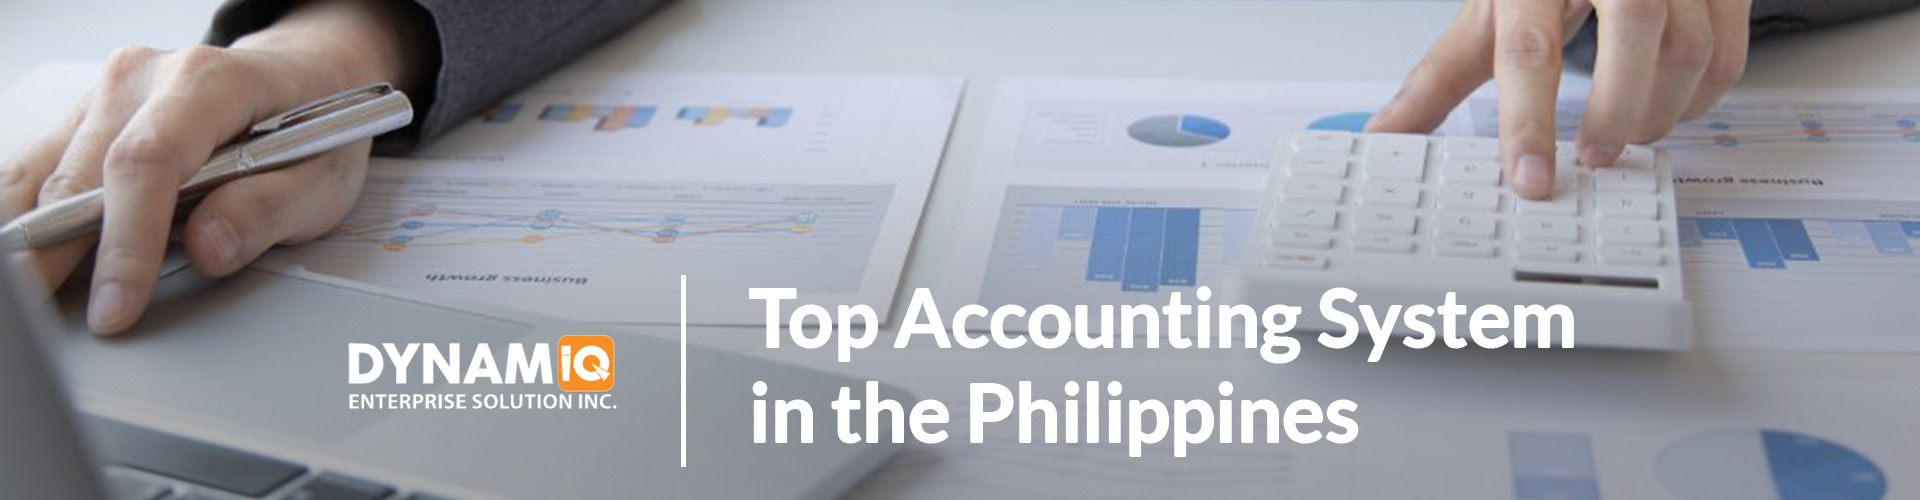 Accounting System Philippines